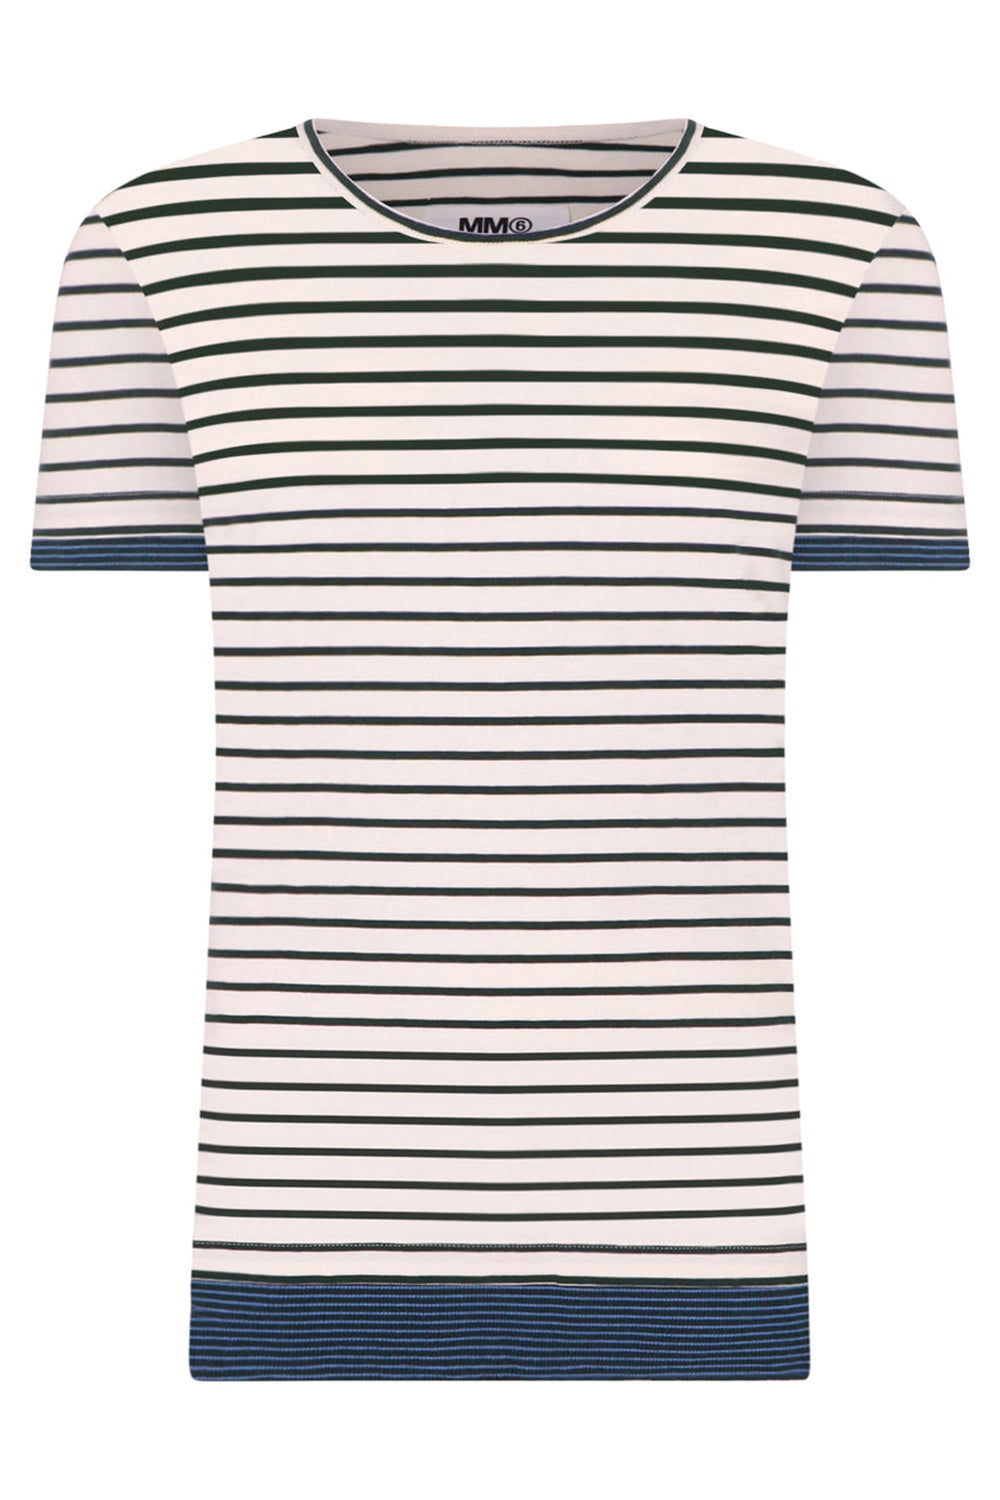 MM6 BY MAISON MARGIELA T-SHIRTS CONTRAST STRIPE S/SLV T-SHIRT | OFF WHITE/POISON GREEN